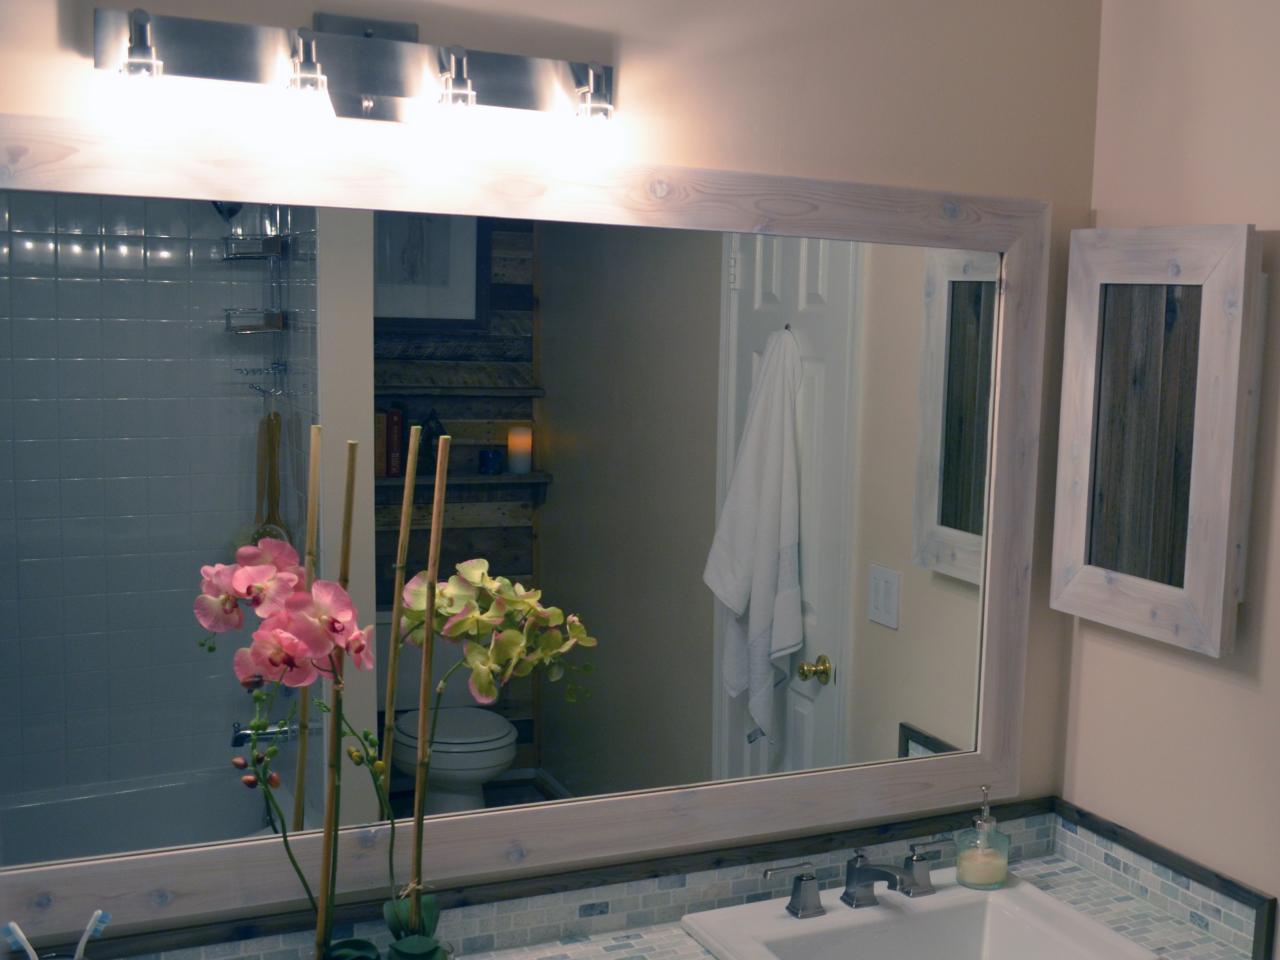 How To Replace A Bathroom Light Fixture, How To Install A New Vanity Light Fixture